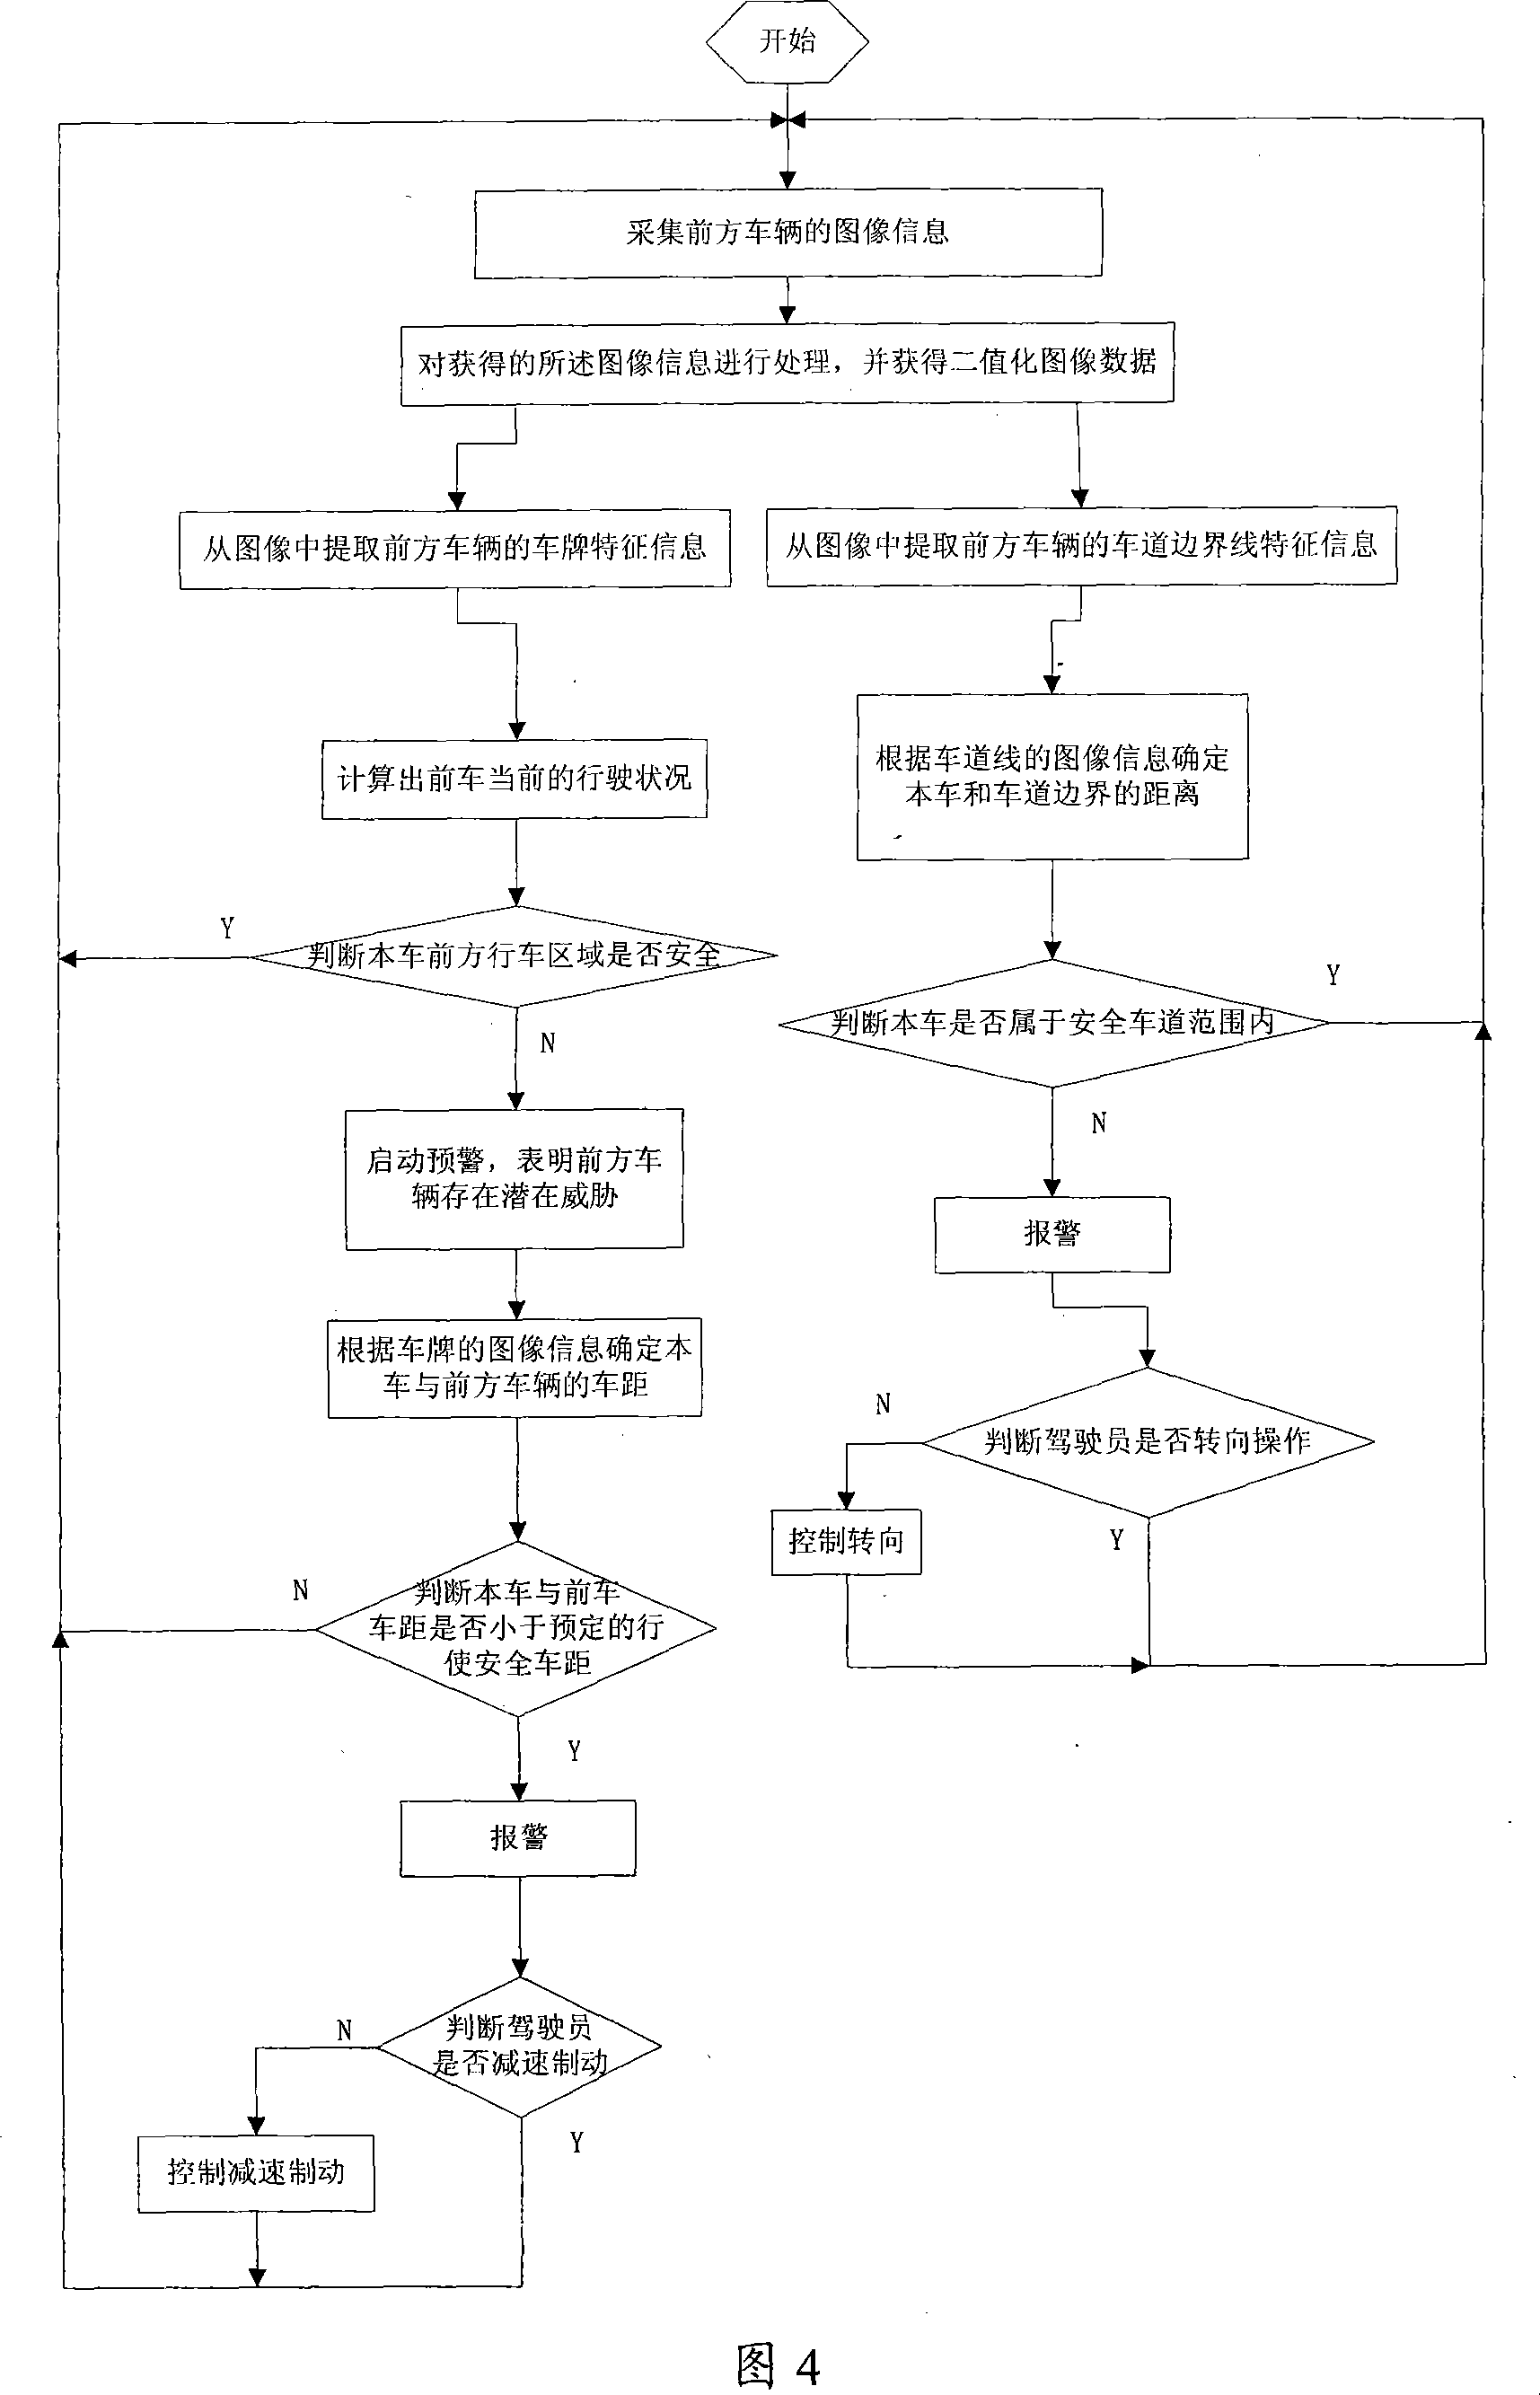 Vehicle anti-collision early warning method and apparatus based on machine vision